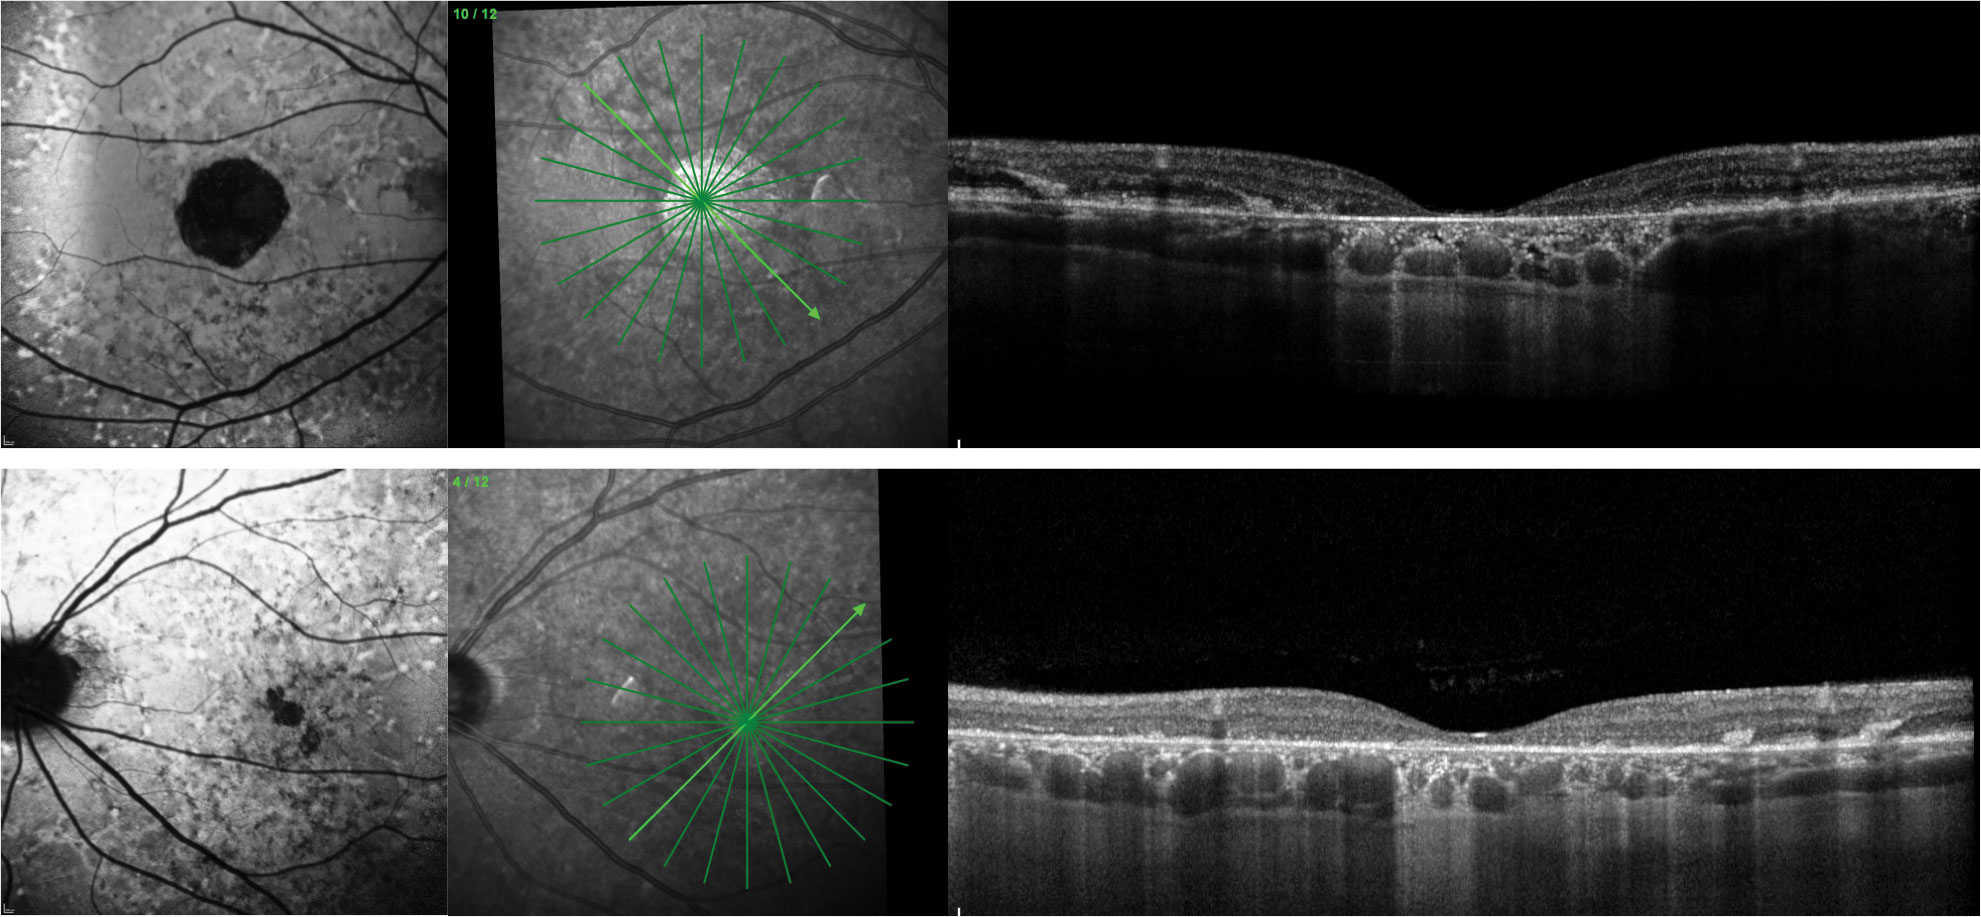 A 54-year-old white male presented with BCVA 20/70 OD and 20/50 OS. He complained of gradually worsening vision over the last two to three years. He had no family history of blindness. Fundus exam revealed bilateral yellow, fleck-type lesions scatted in the posterior pole and macular atrophy. FAF showed diffuse alteration of the autofluorescent signal. OCT showed hyper-reflective outer retinal deposits OU, photoreceptor atrophy OS and more extensive macular atrophy OD. The appearance is similar to Stargardt’s disease, but genetic testing identified a heterozygous pathogenic variant in PRPH2 more consistent with multifocal pattern dystrophy mimicking Stargardt’s.